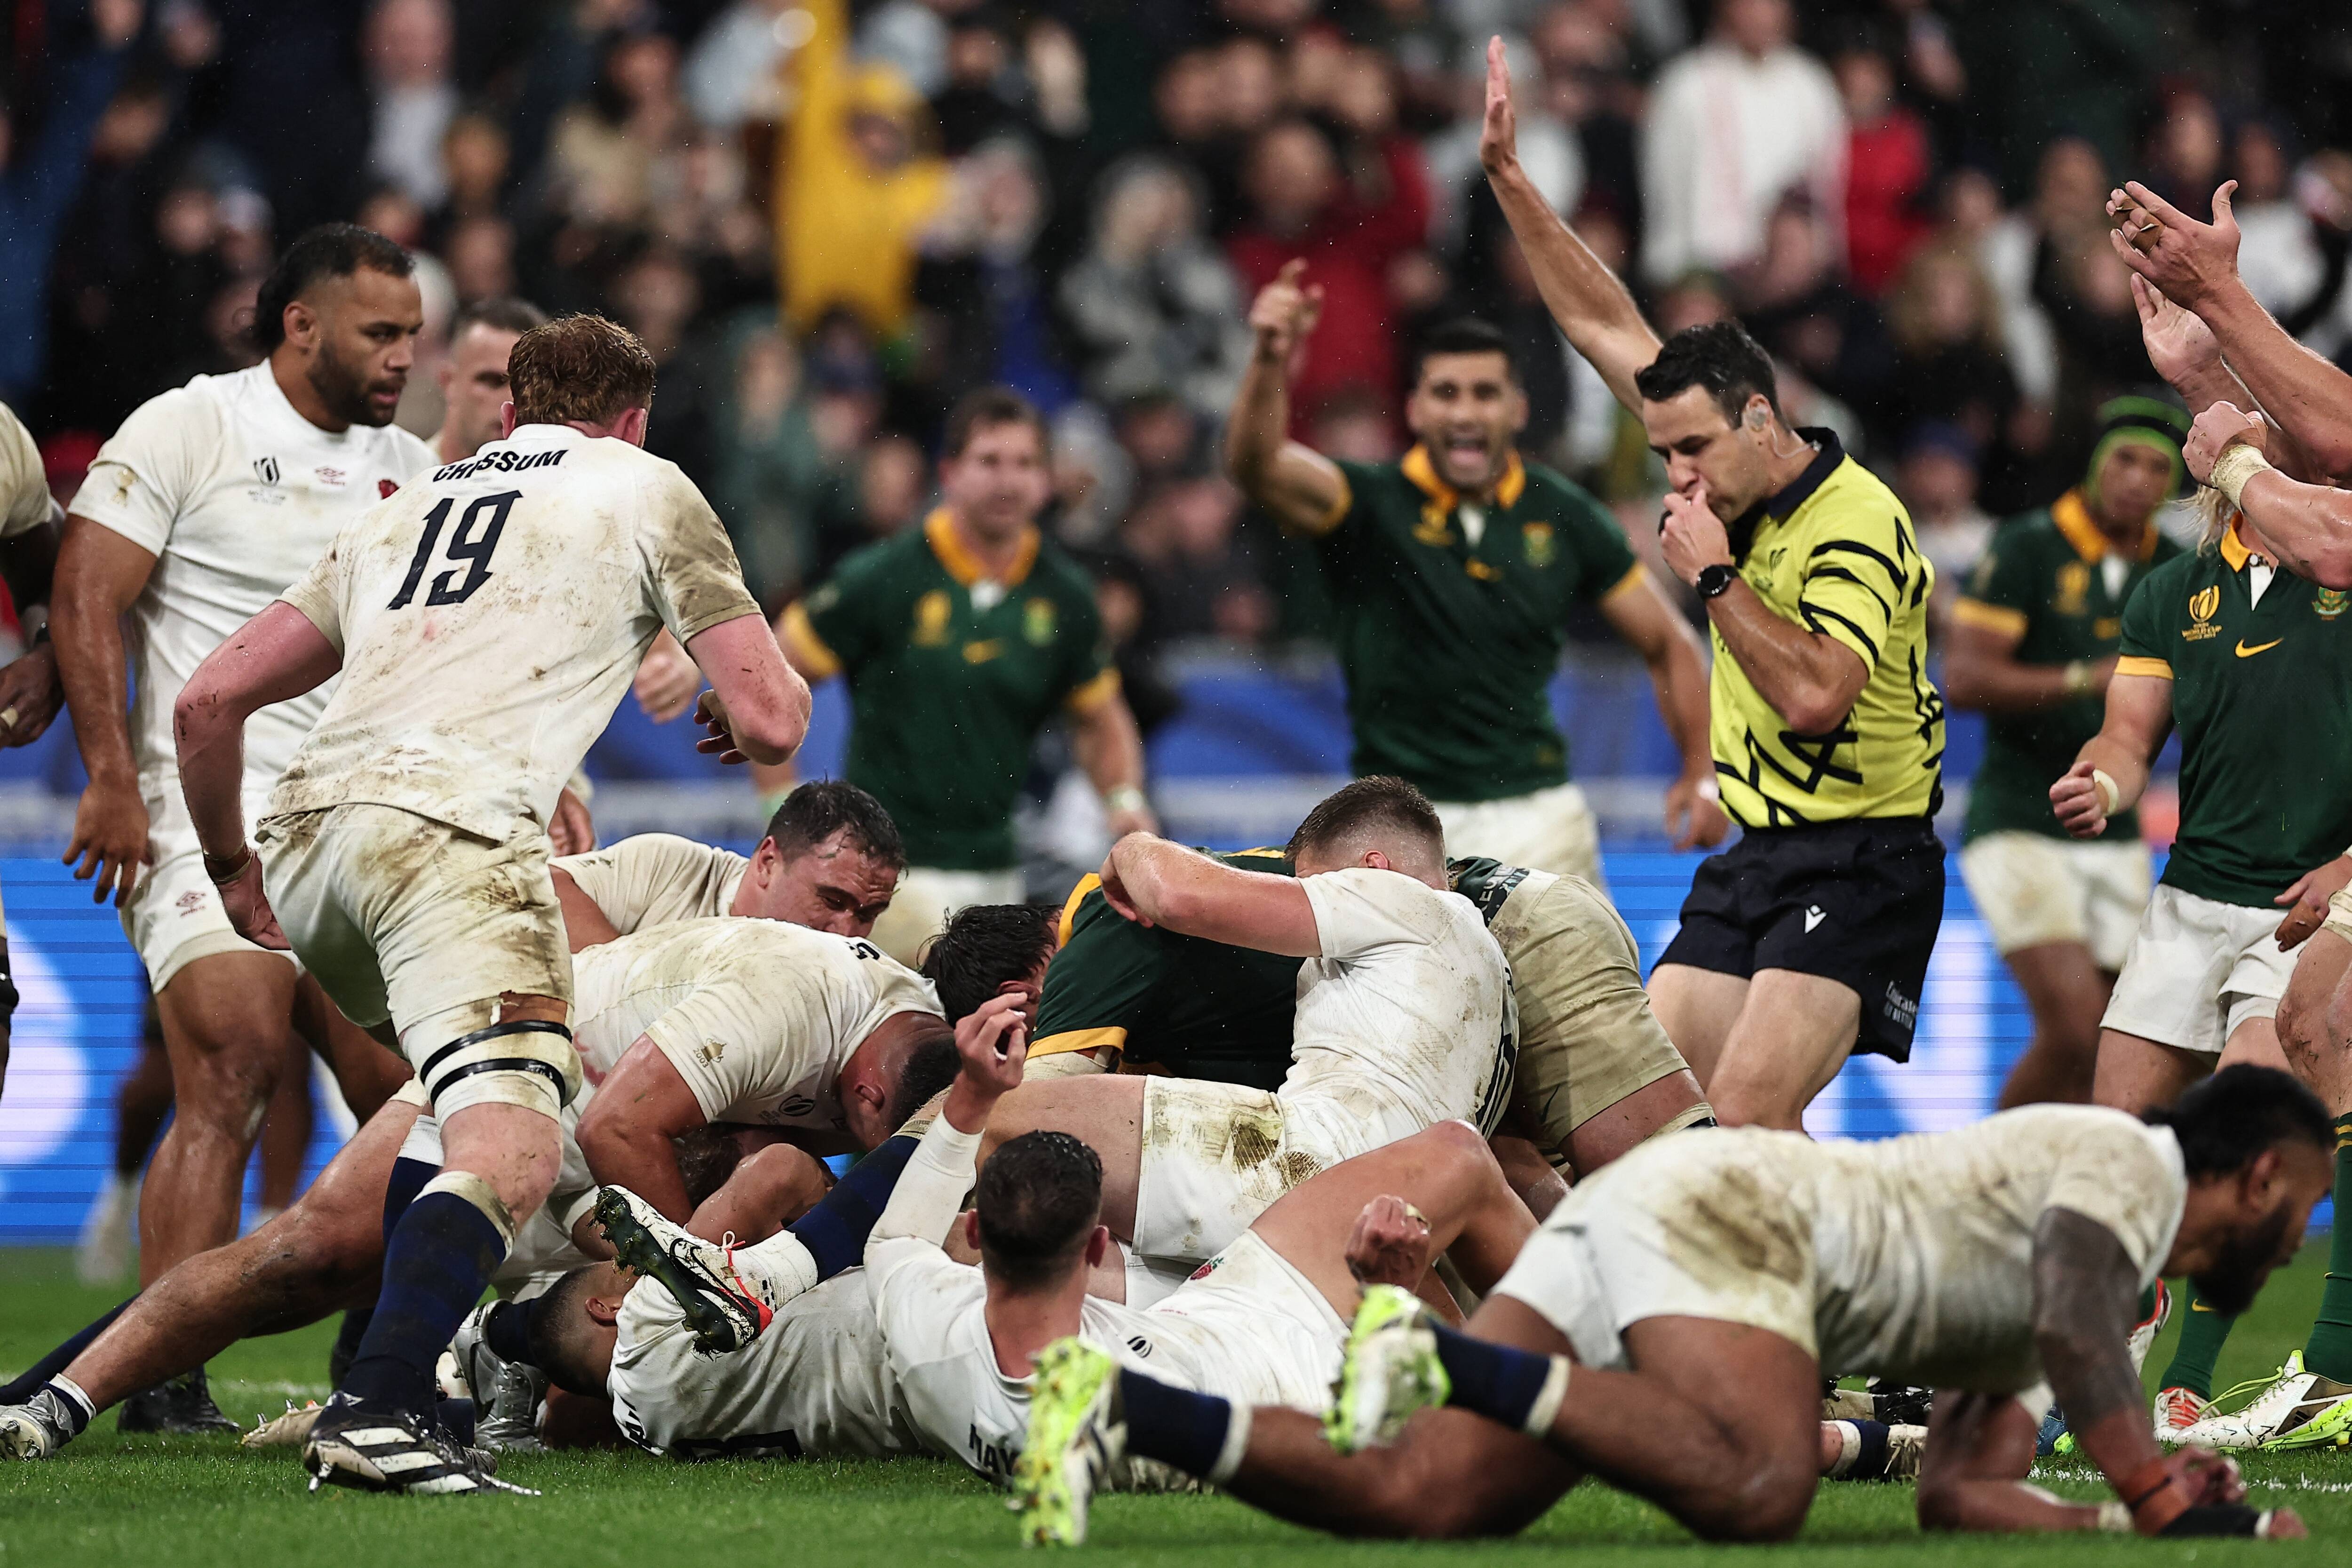 Comment bien choisir son TEE de rugby - CULTURE RUGBY